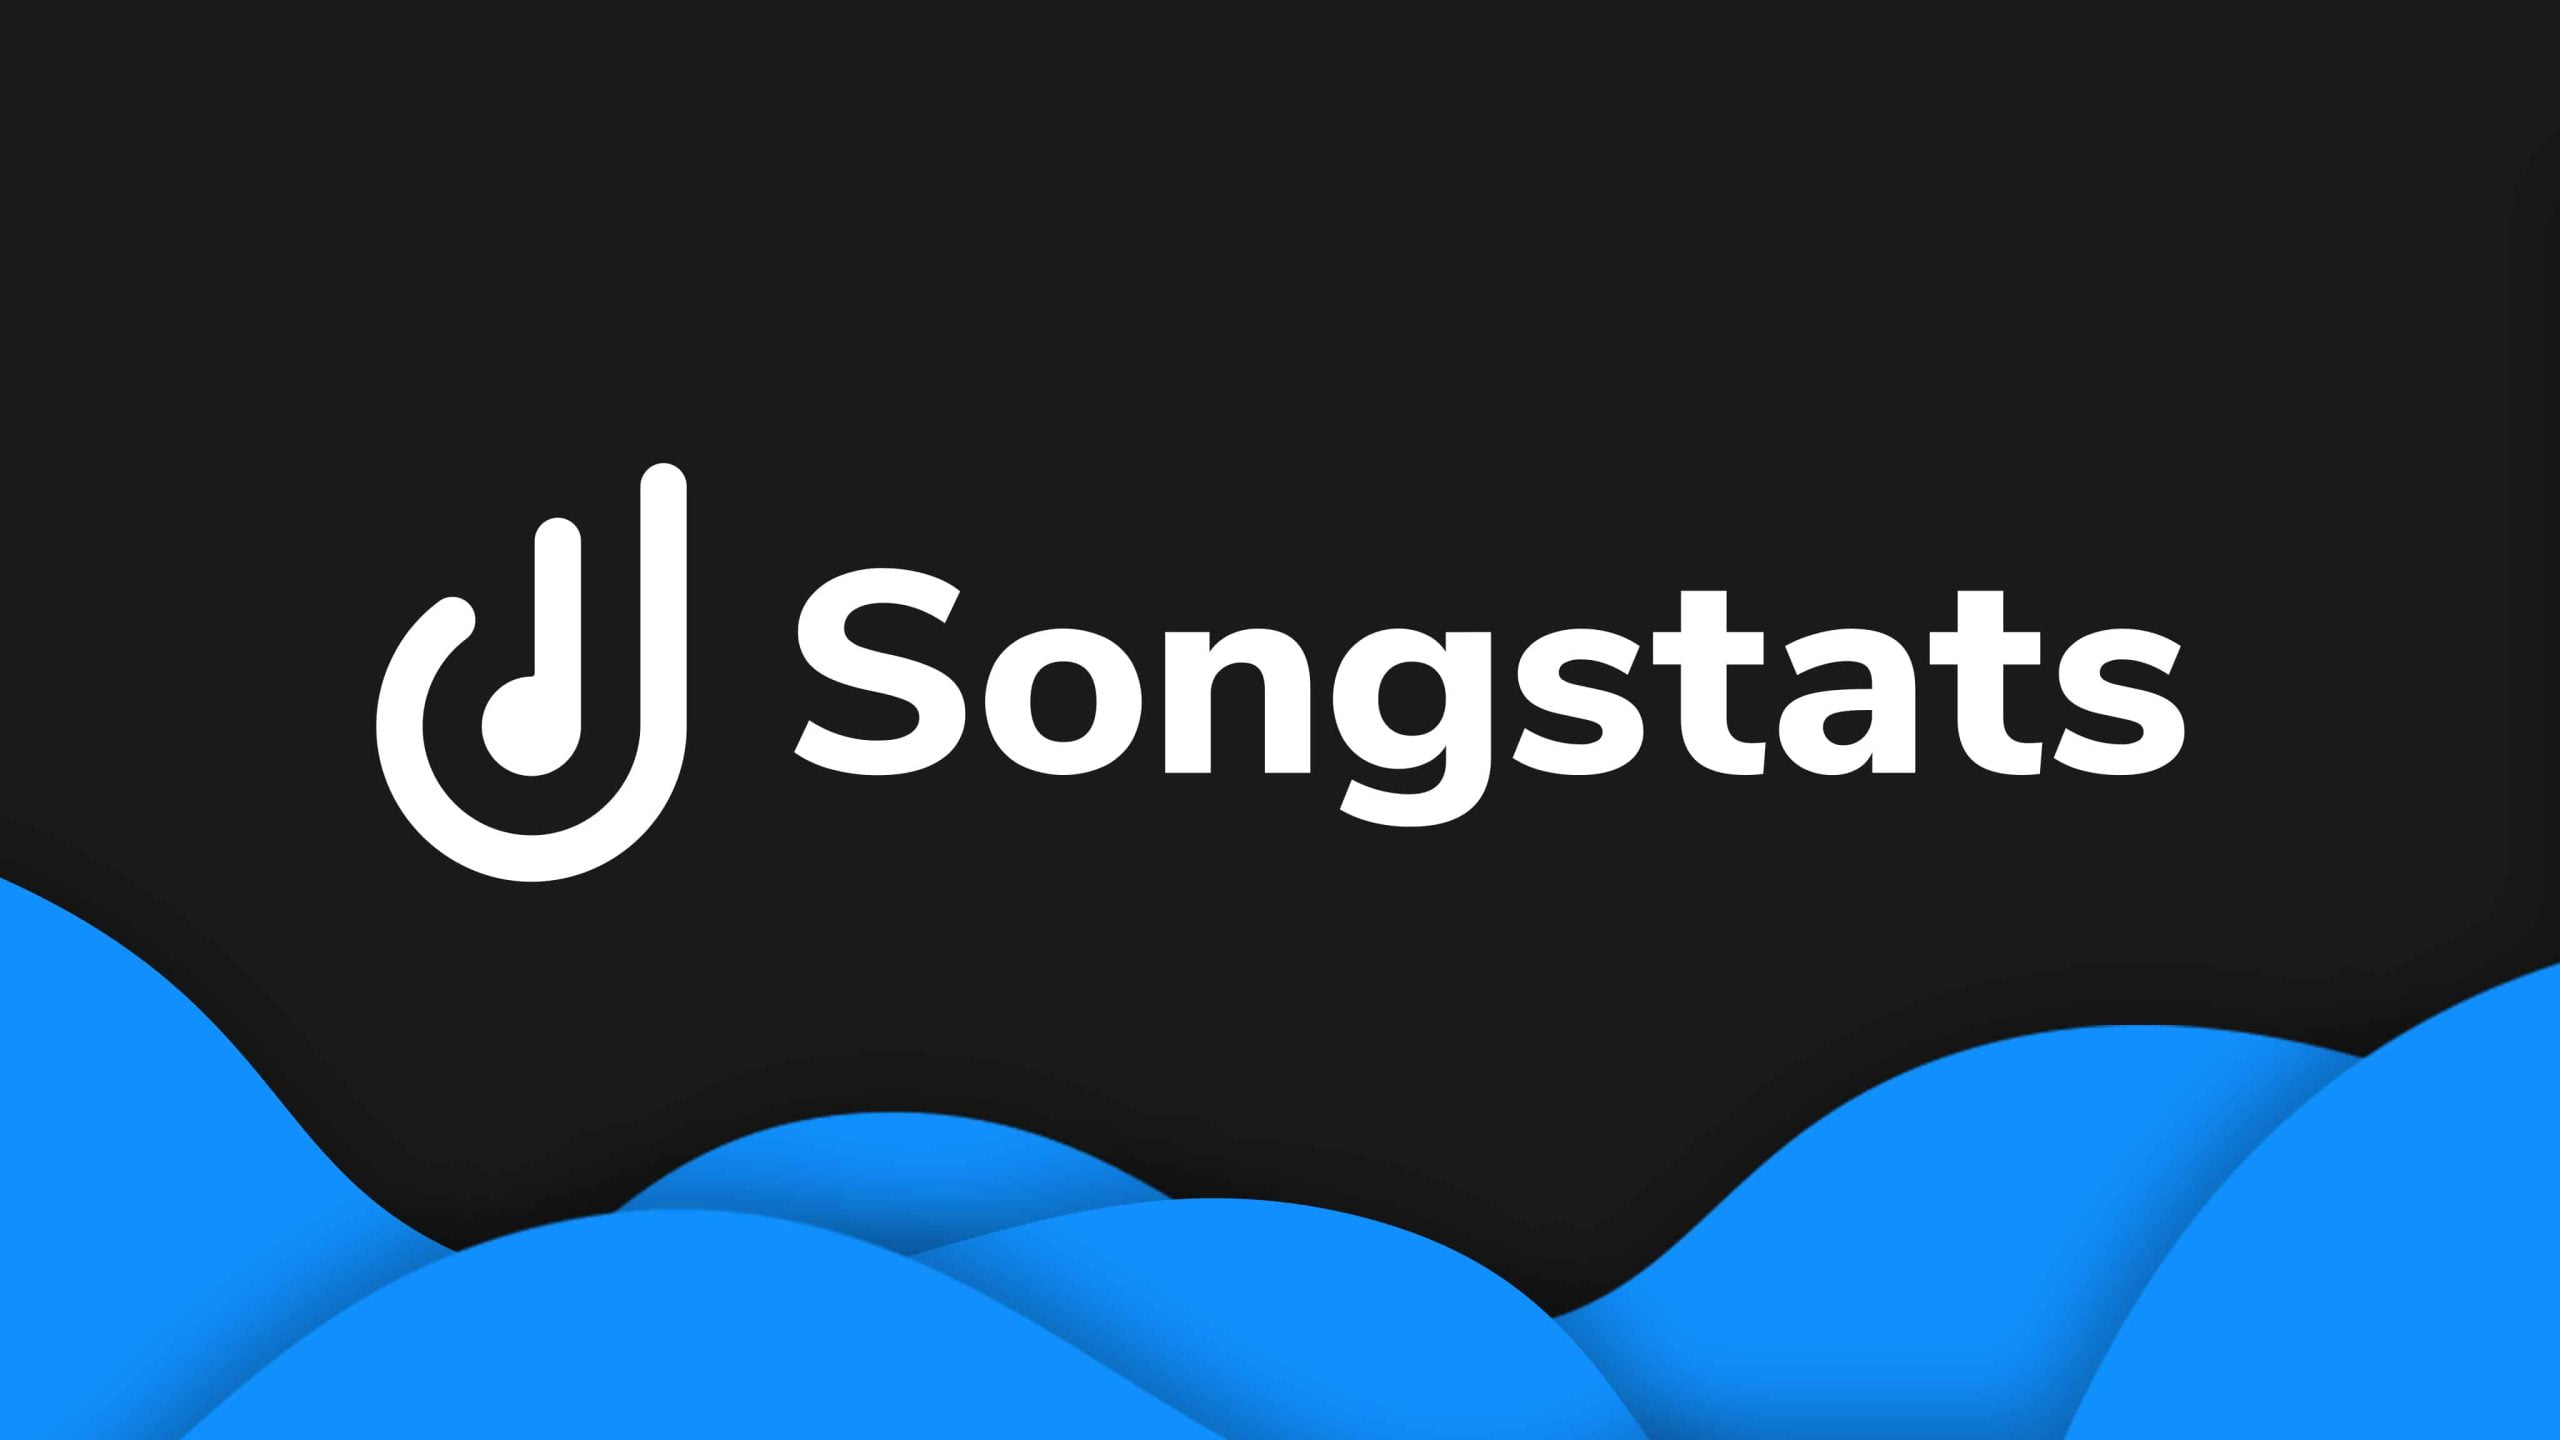 Songstats: The new music analytics app from 1001Tracklists